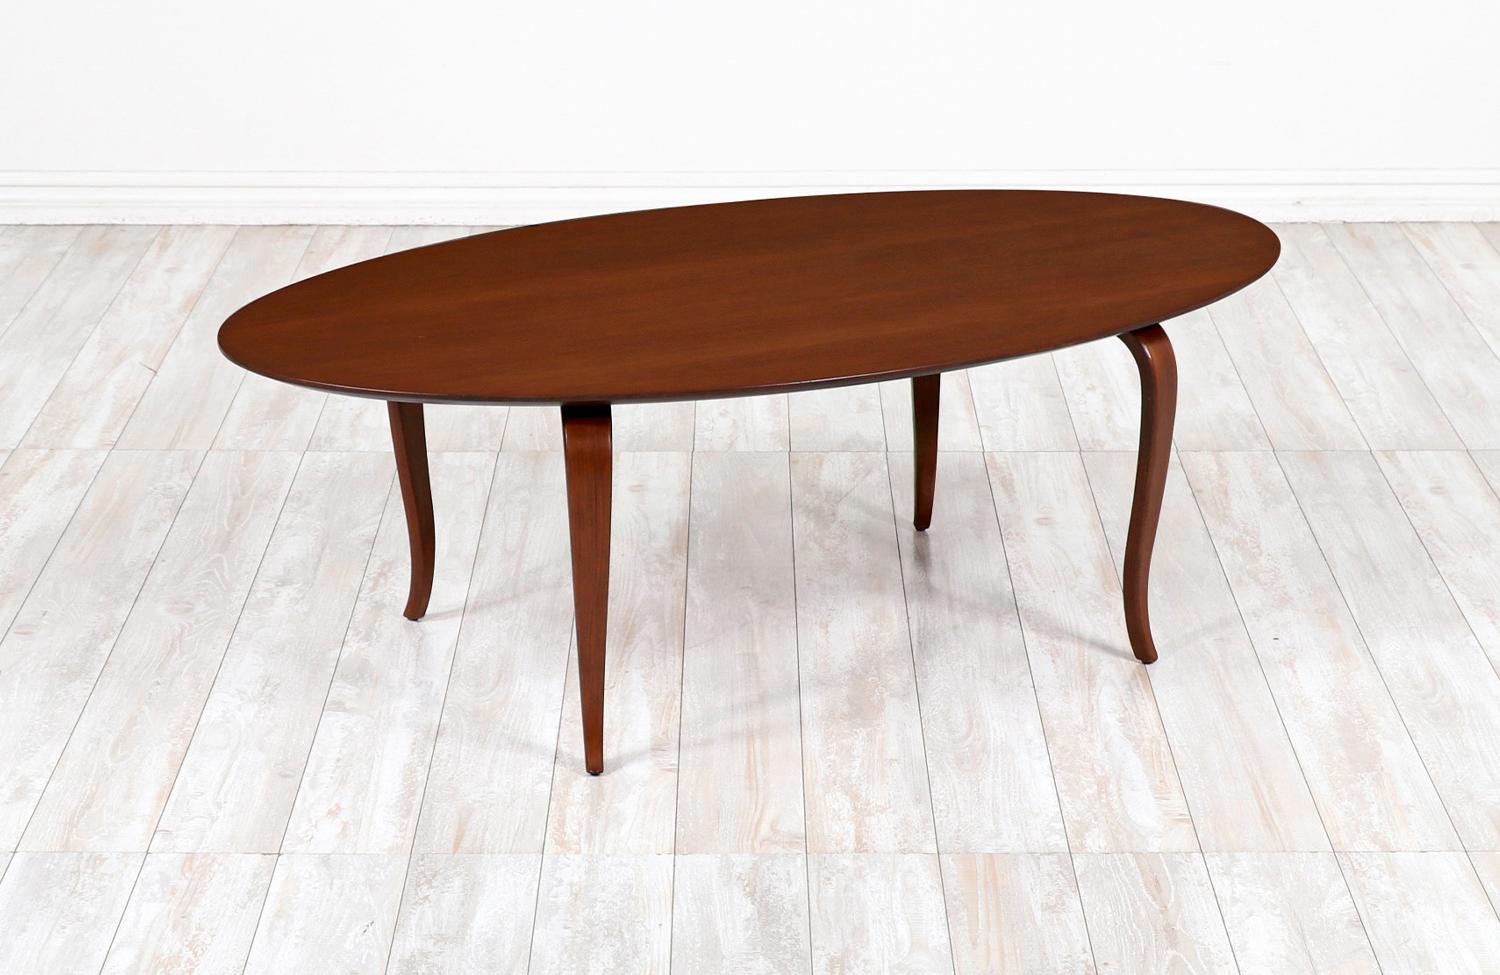 Thomas stender surfboard oval coffee table for Sigma.

________________________________________

Transforming a piece of Mid-Century Modern furniture is like bringing history back to life, and we take this journey with passion and precision. With